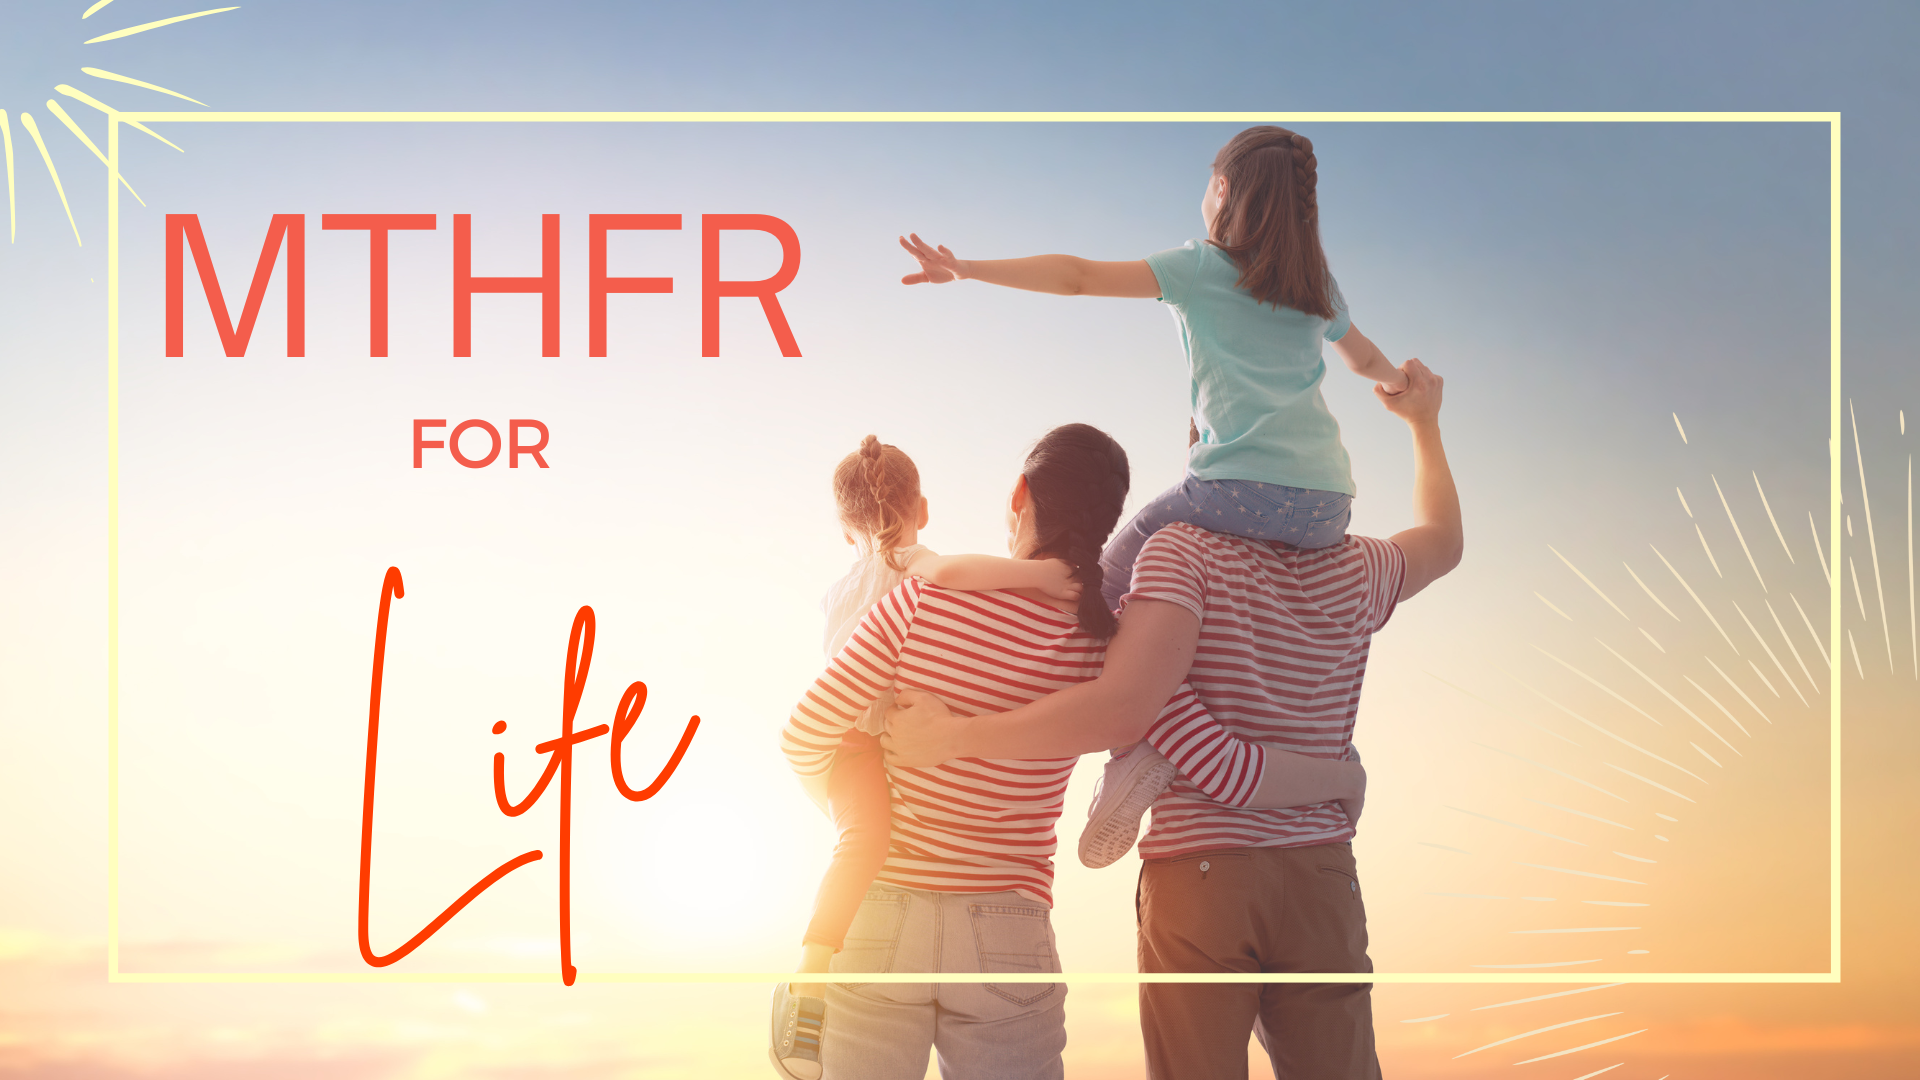 MTHFR course, MTHFR class, Get Healthy With MTHFR Instructions